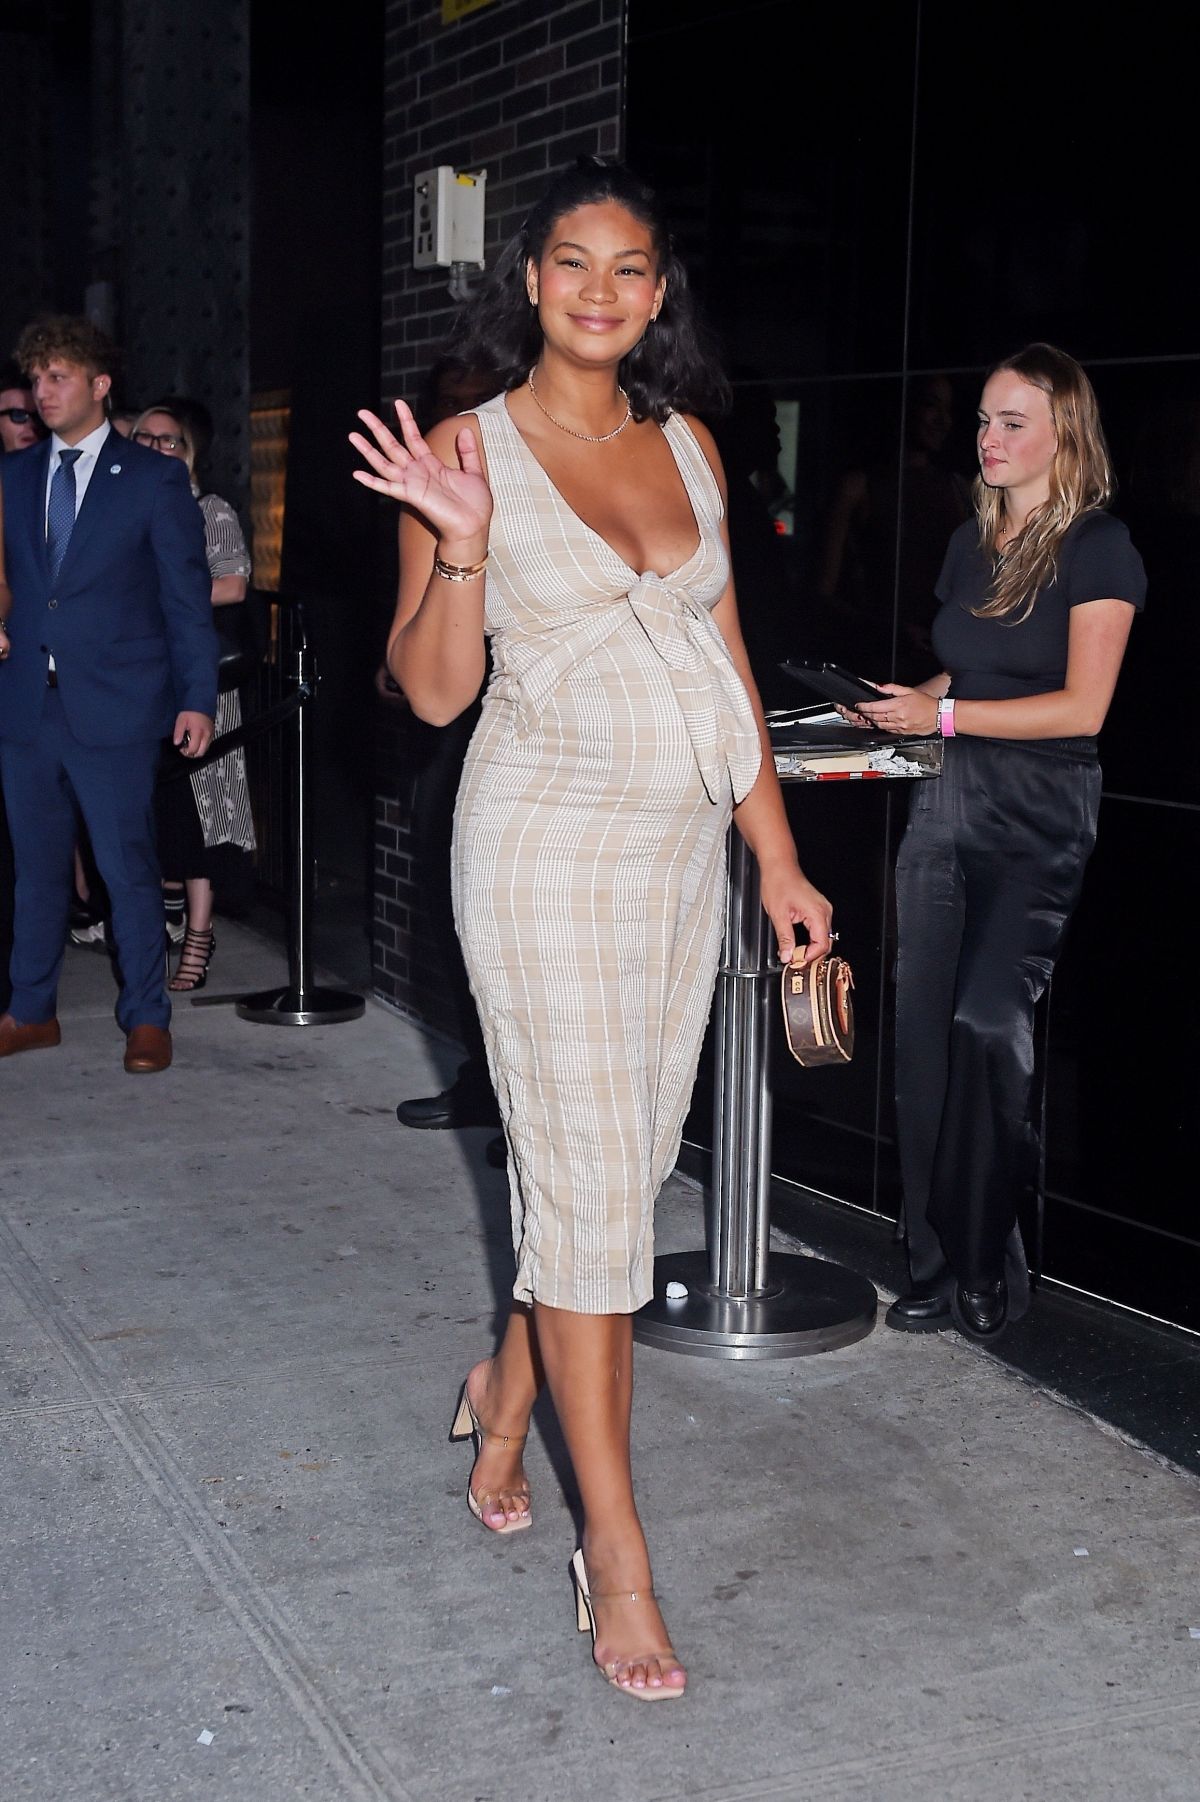 Pregnant Chanel Iman Arrives at Boom Boom Room for Expedia Event in NYC